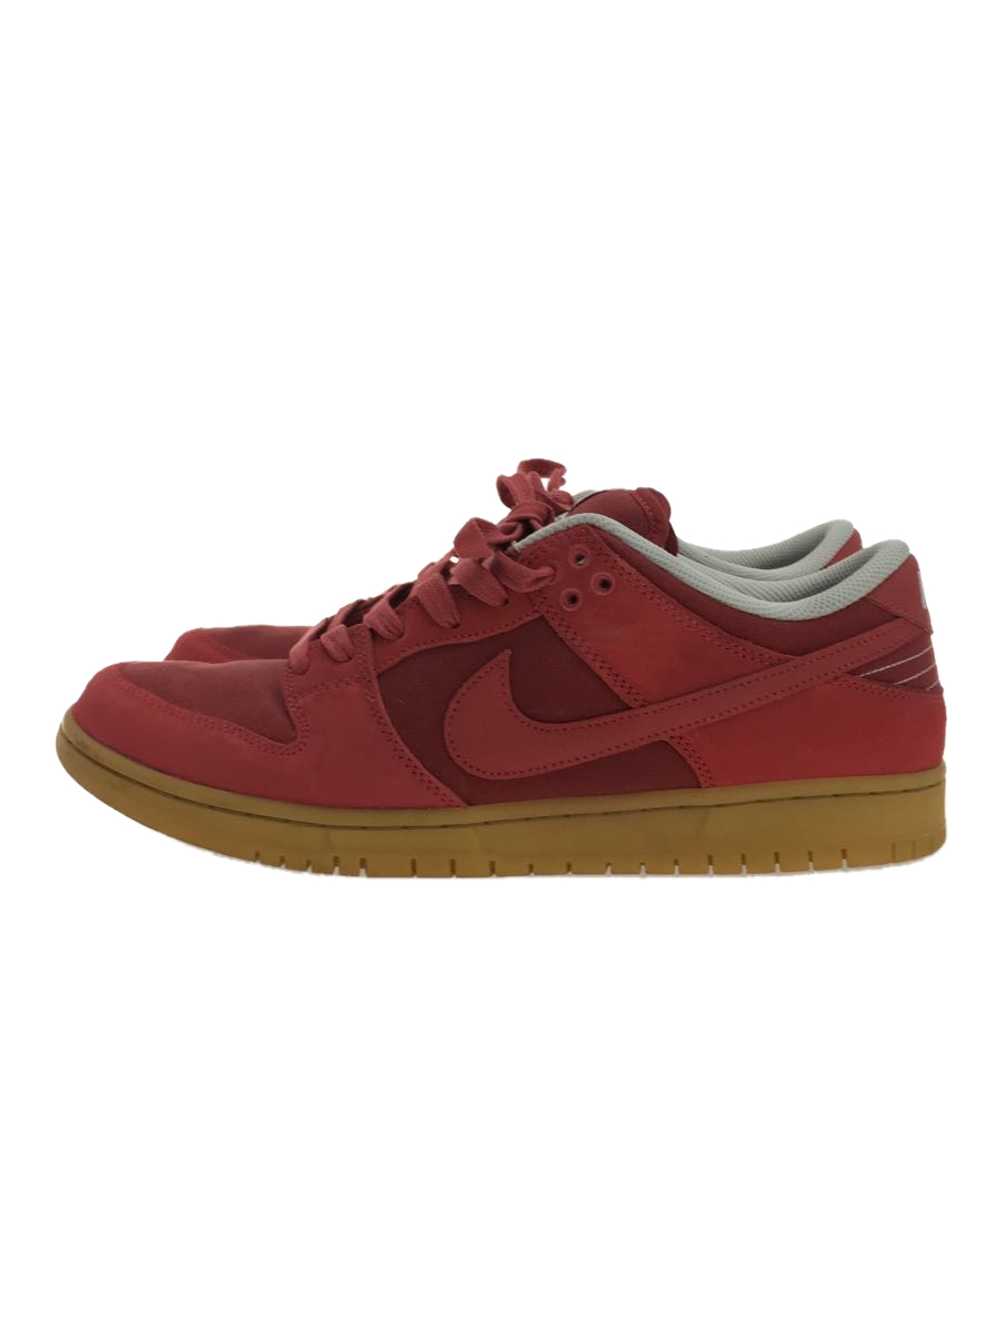 Nike Low Cut Sneakers/Red/Dv5429-600 Shoes US11 J… - image 1